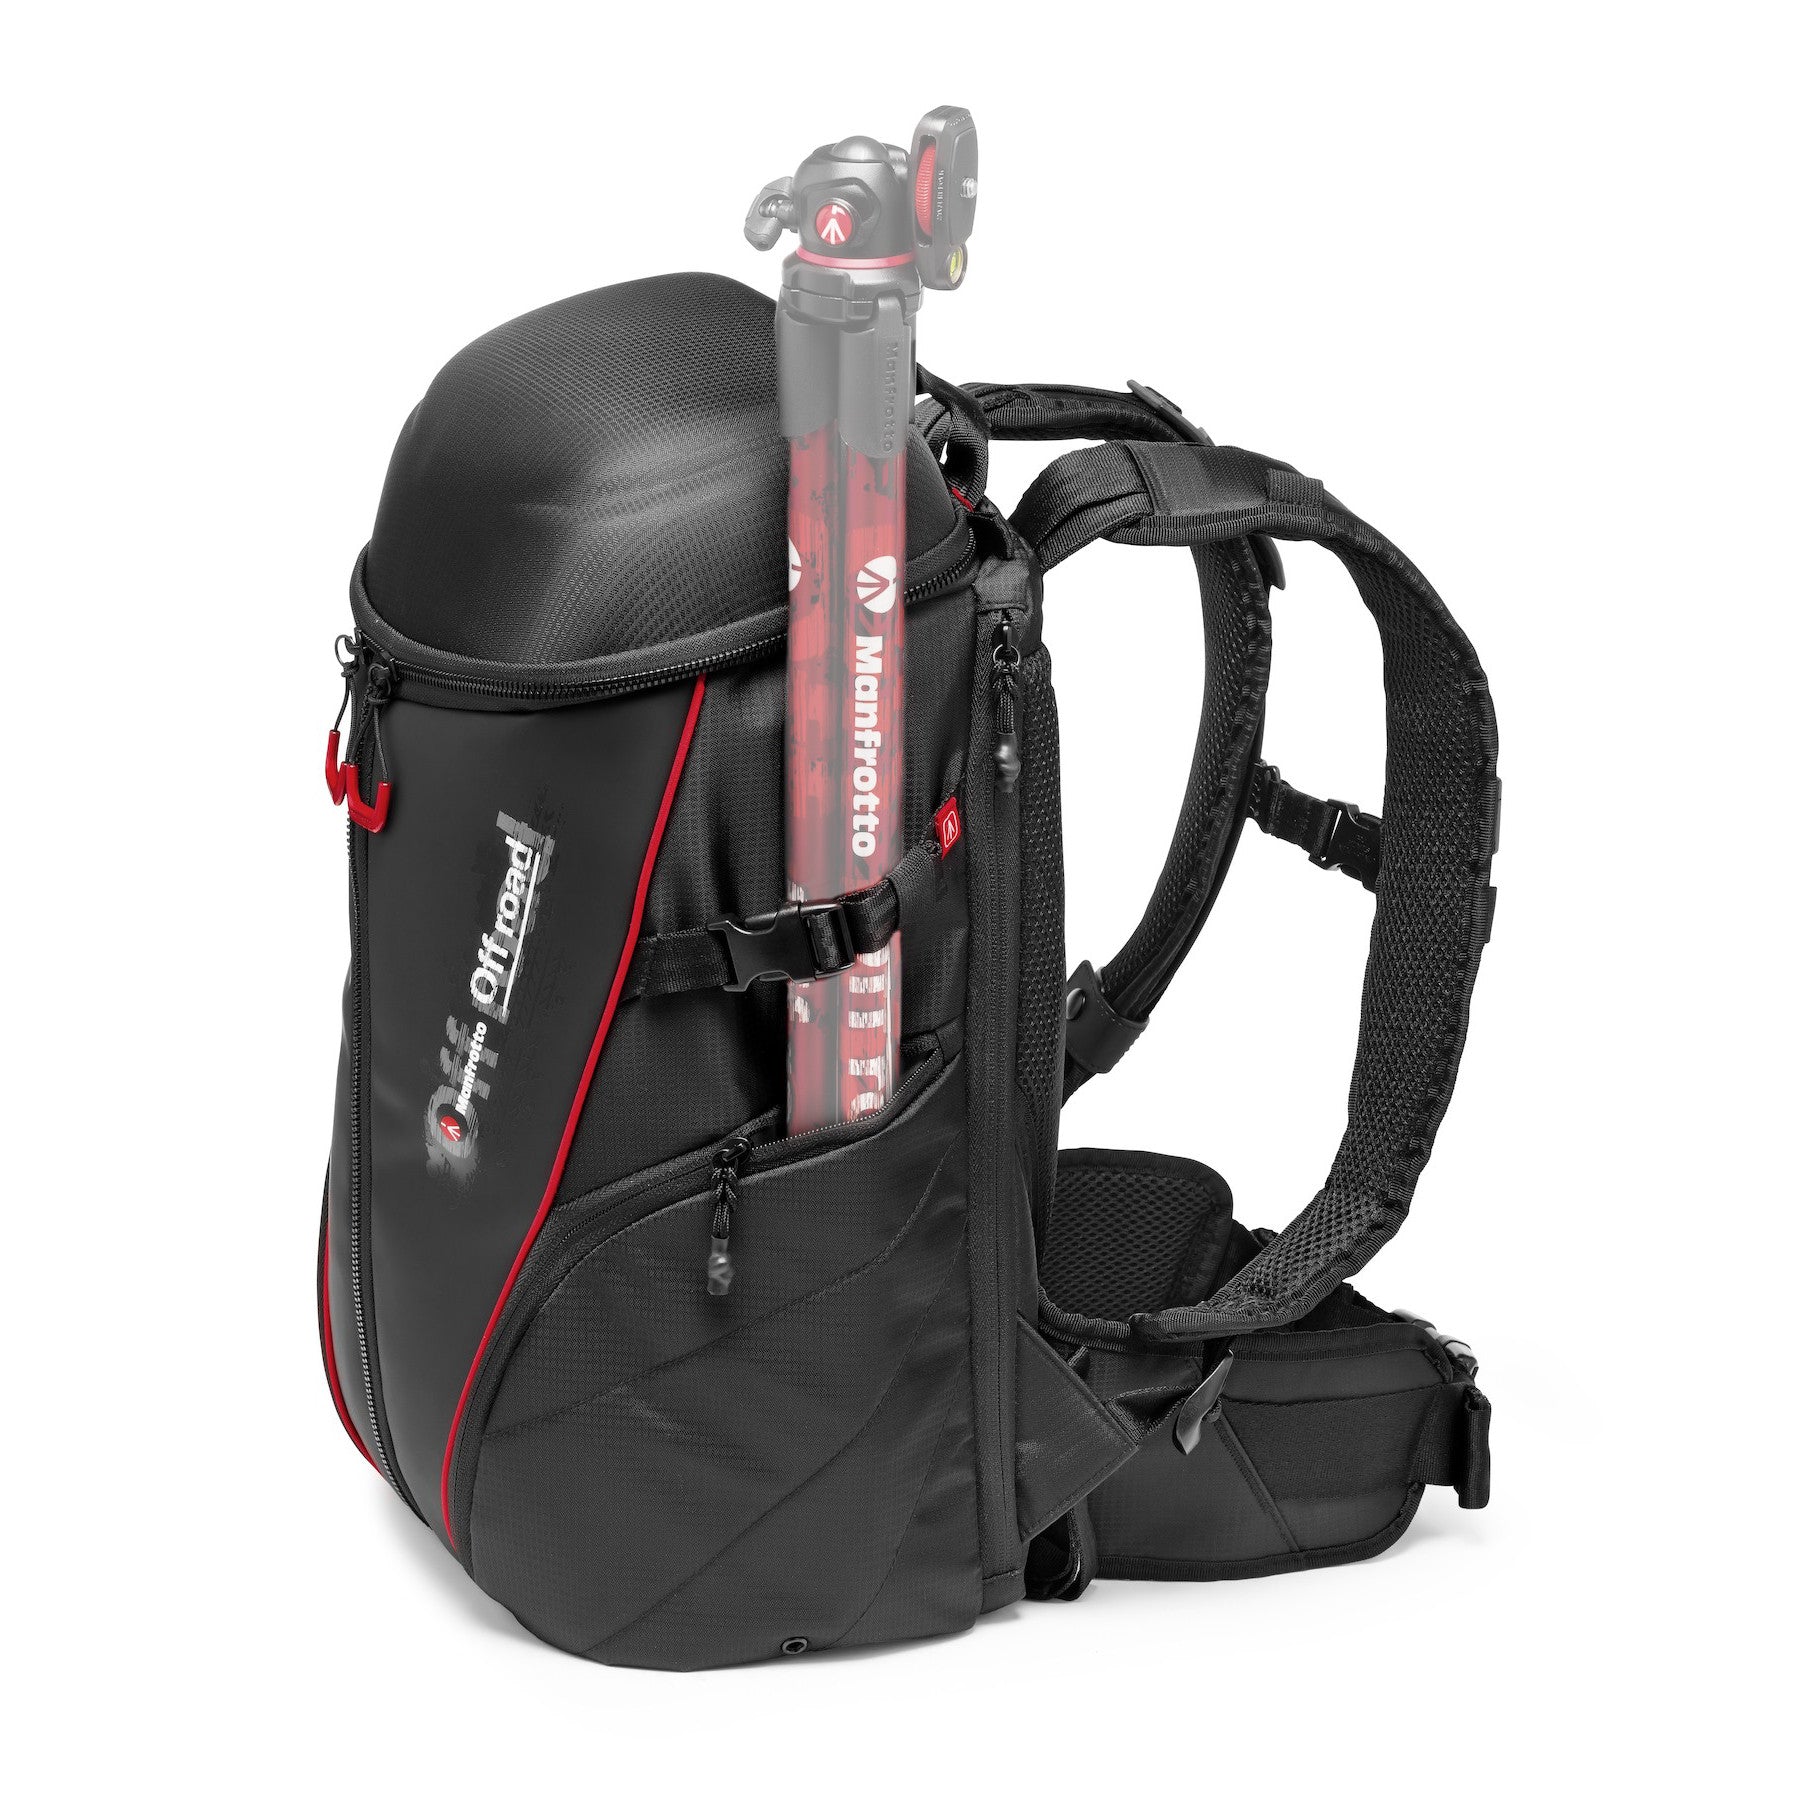 Manfrotto Off Road Stunt Backpack (Black), bags backpacks, Manfrotto - Pictureline  - 6